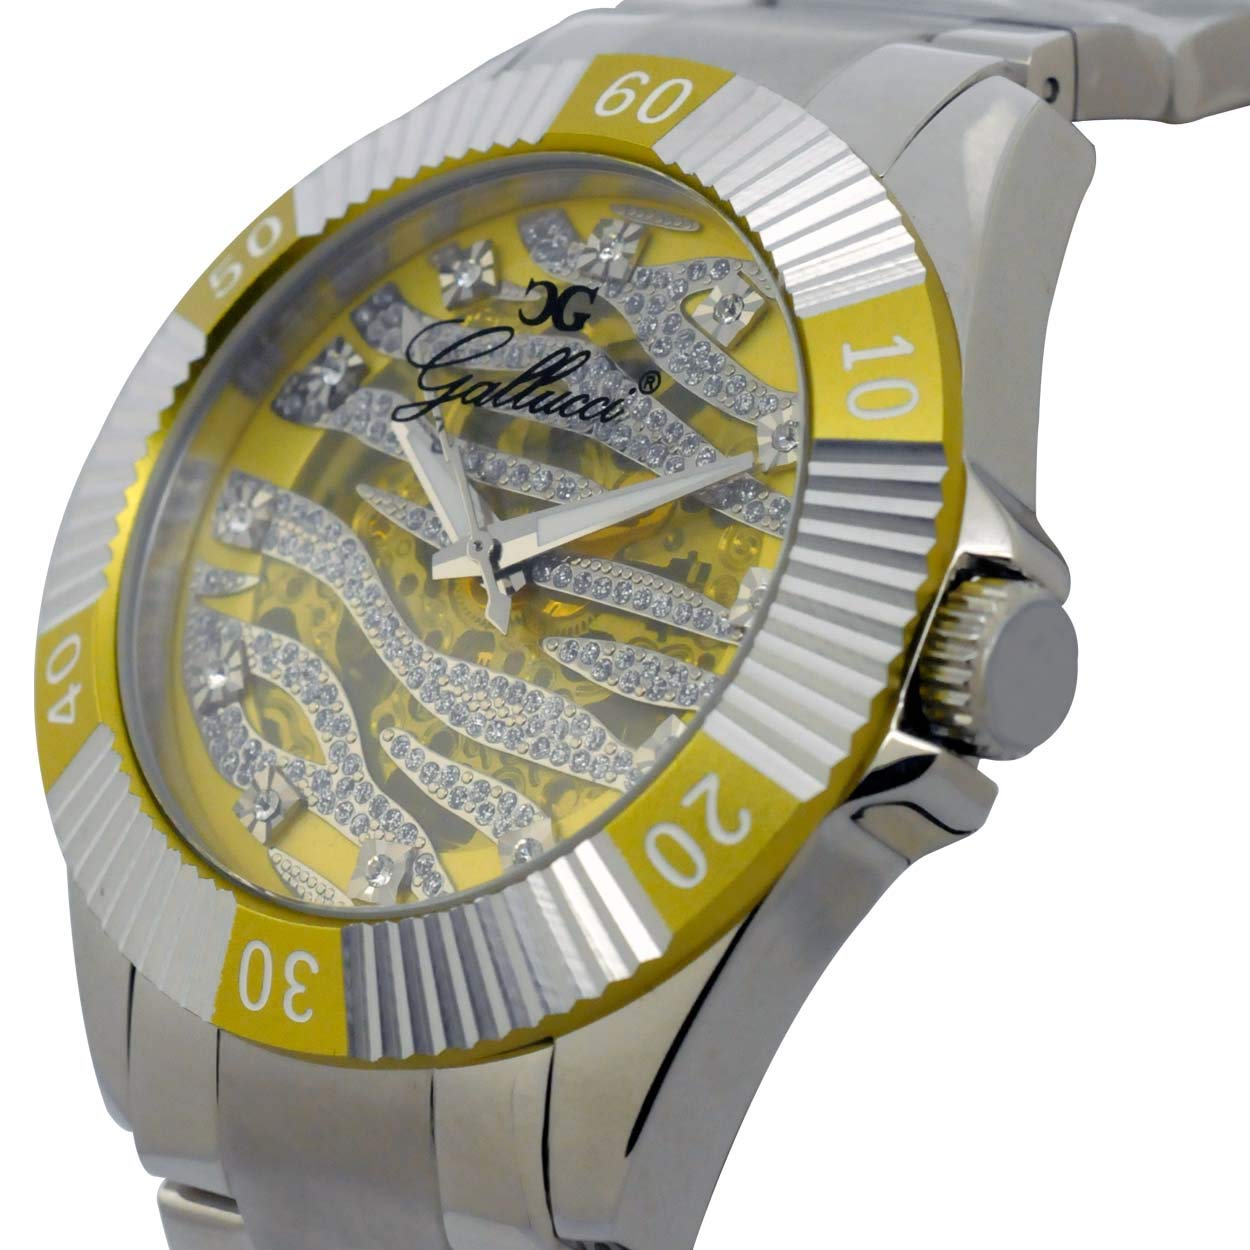 Gallucci Unisex Fashion Skeleton Automatic Wrist Watch, Color Dial with Stainless Steel Band